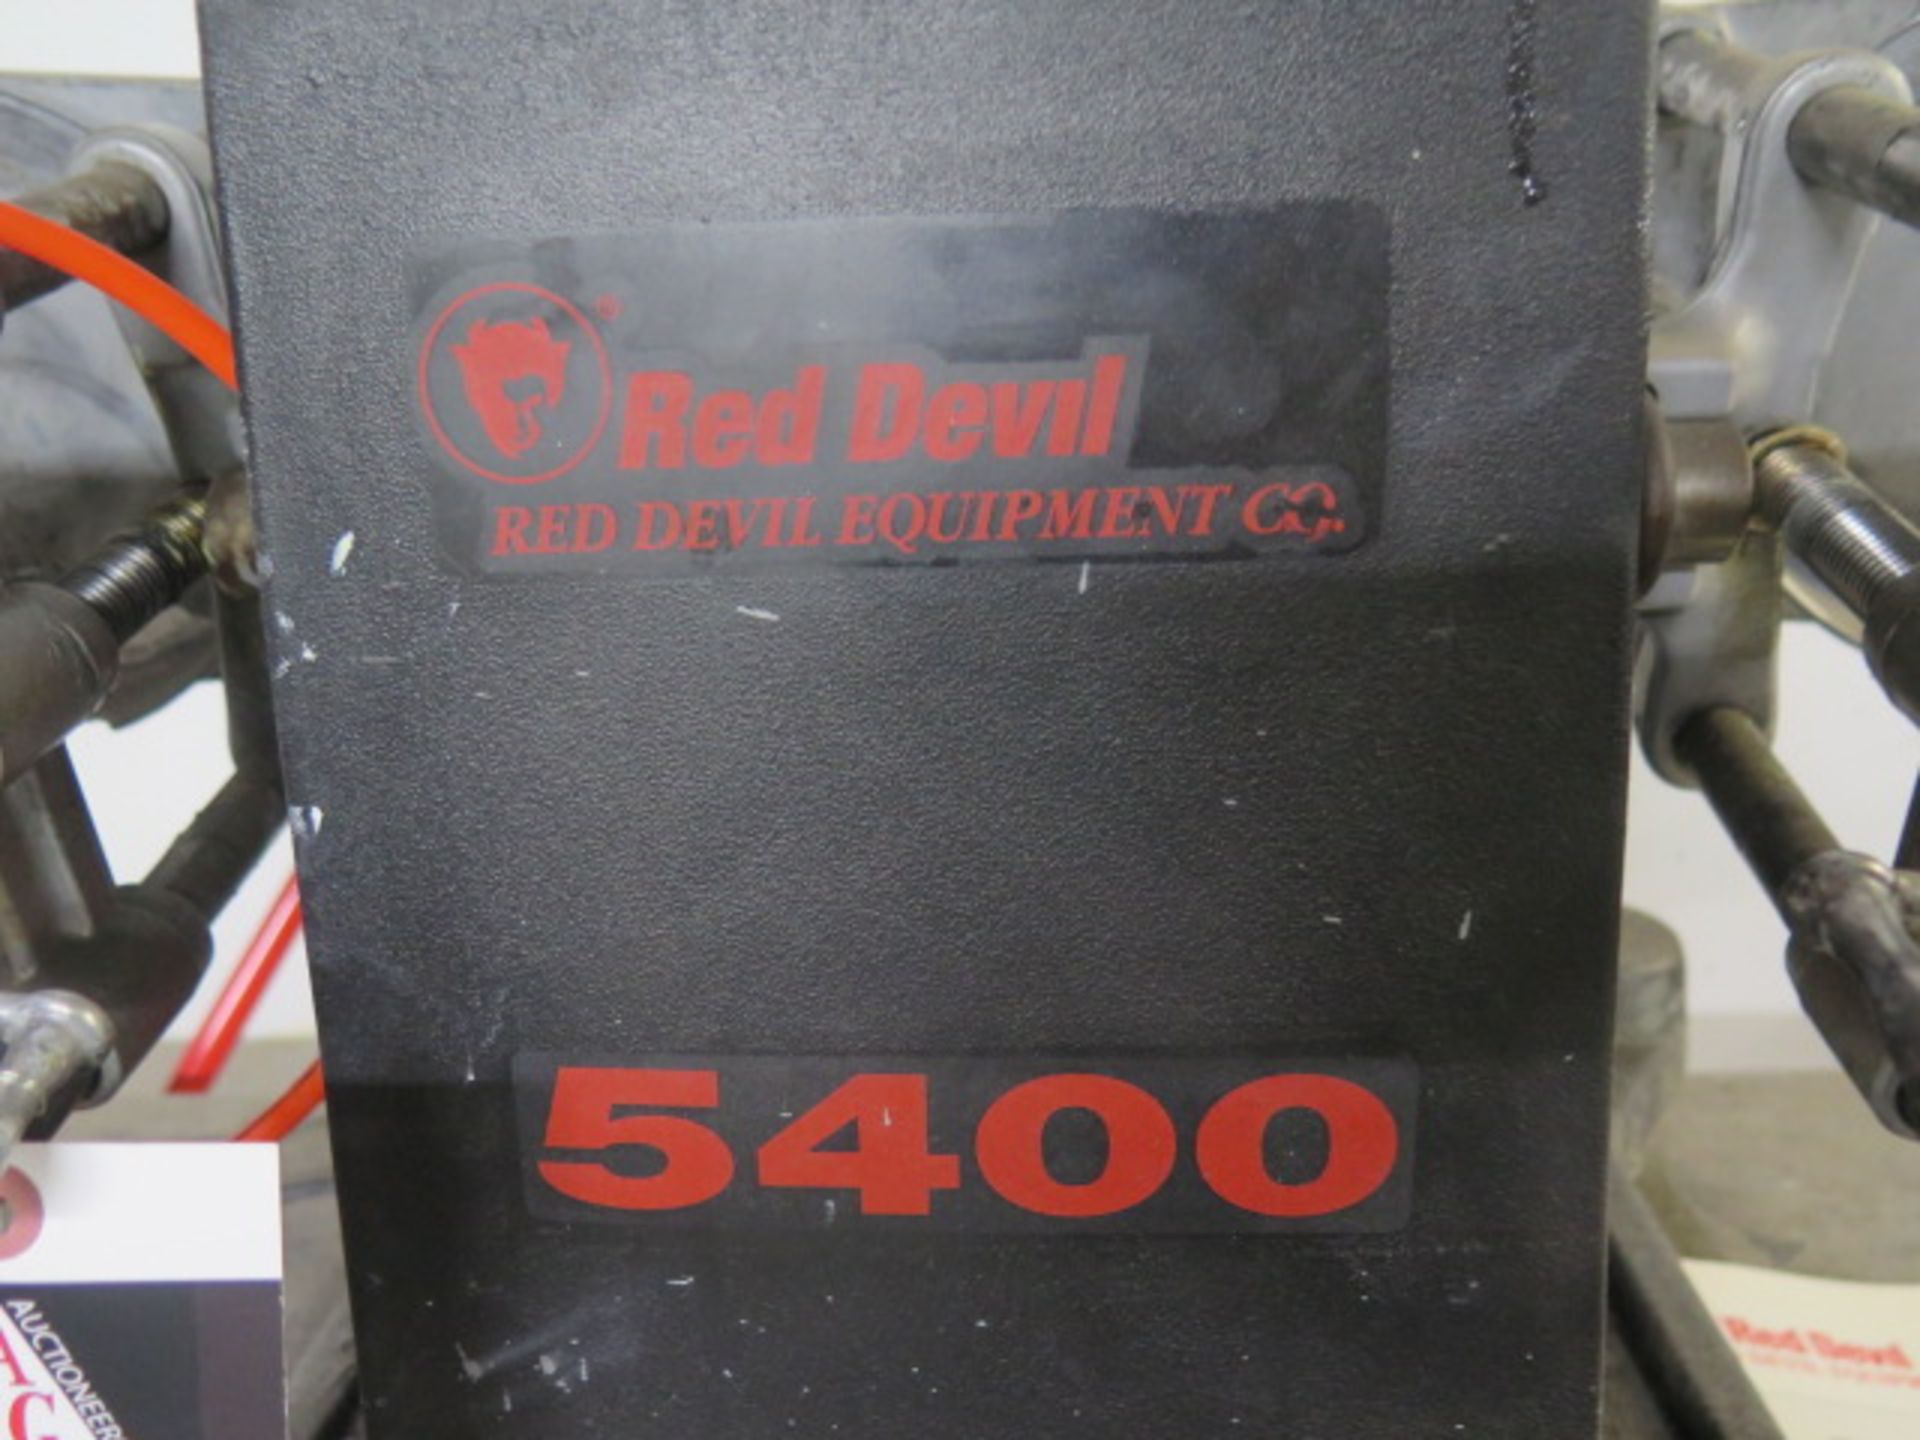 Red Devil mdl. 5400 Paint Shaker (SOLD AS-IS - NO WARRANTY) - Image 6 of 7